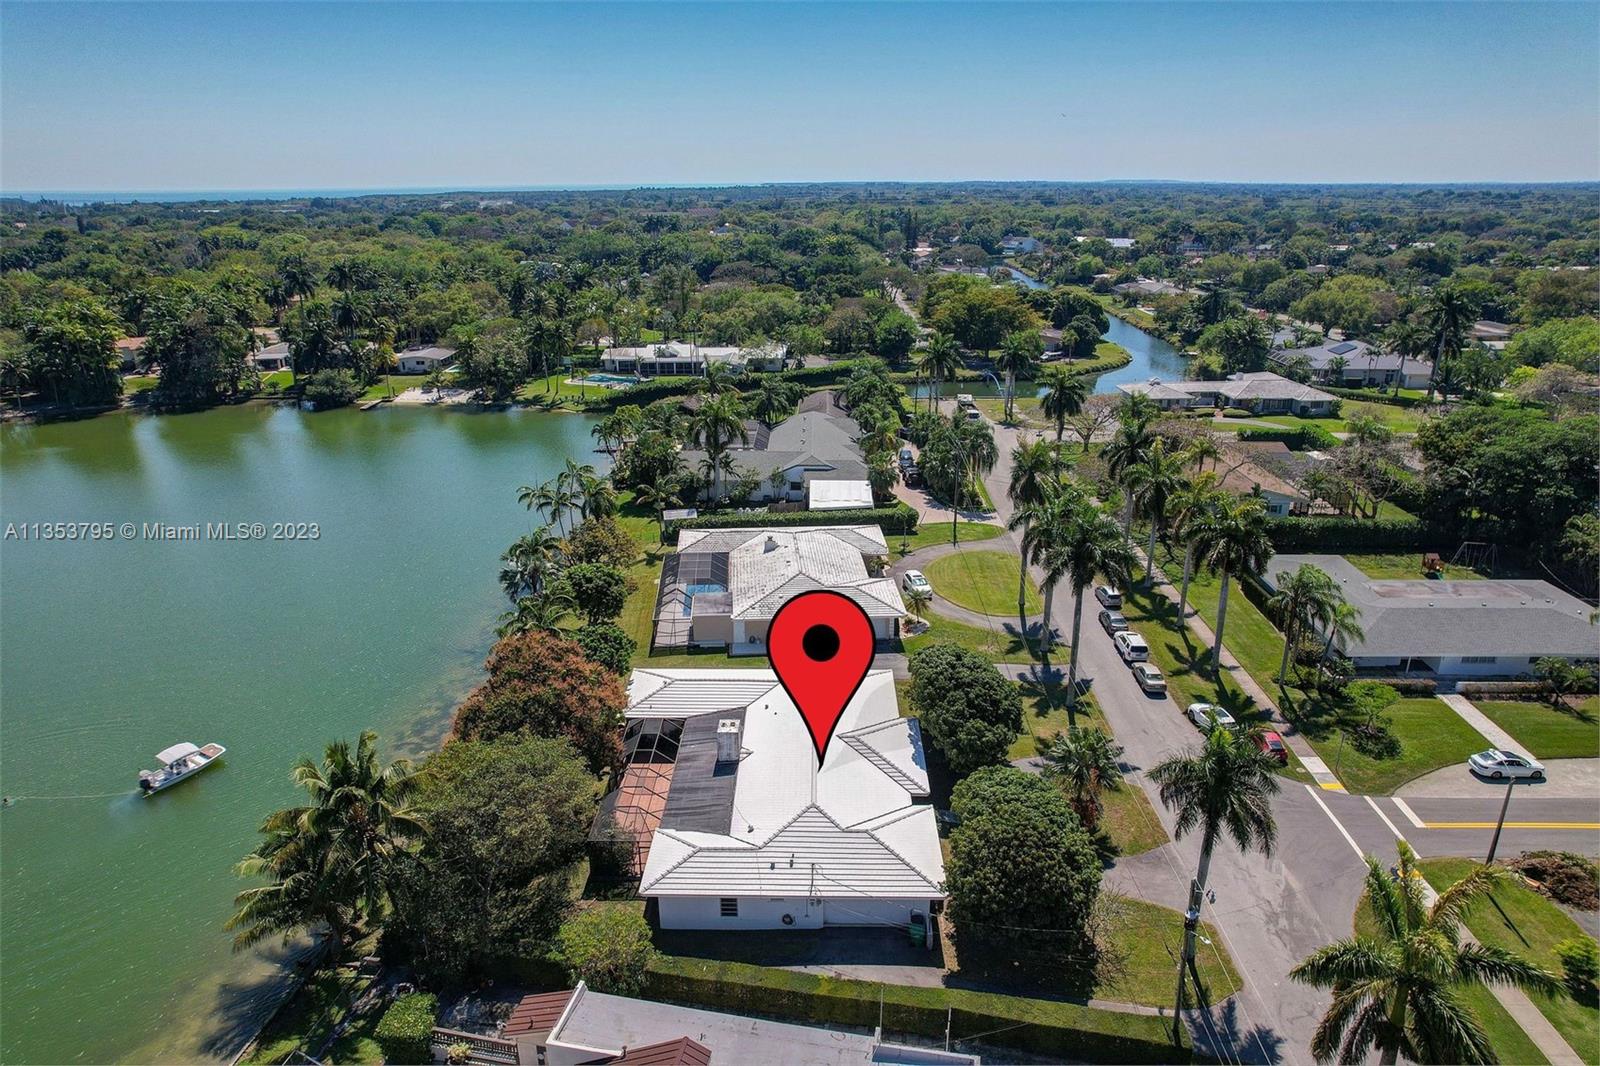 Stunning water views at this spacious lakefront home, just south of 136 ST on the quieter part of 72 AV -Wonderful north Palmetto Bay neighborhood, Palmetto Schools! This is the very first time this home is on the market. The owners' parents picked this specific lot to build, centering the Tanglewood lake. There's a huge patio with plenty of room to add a pool. This home has many possibilities for your remodel, with spacious bathrooms and extra closets, there are options to open and expand. See floor plans at the end of the photos. There are 4 bedrooms stacked, w/ the 5th bedroom / 3rd bathroom on opposite side, great for guests, in-laws, or a home office.  Formal dining room, large kitchen remodeled "after Andrew" is open to the family room and adjacent to the patio. Selling AS-IS.